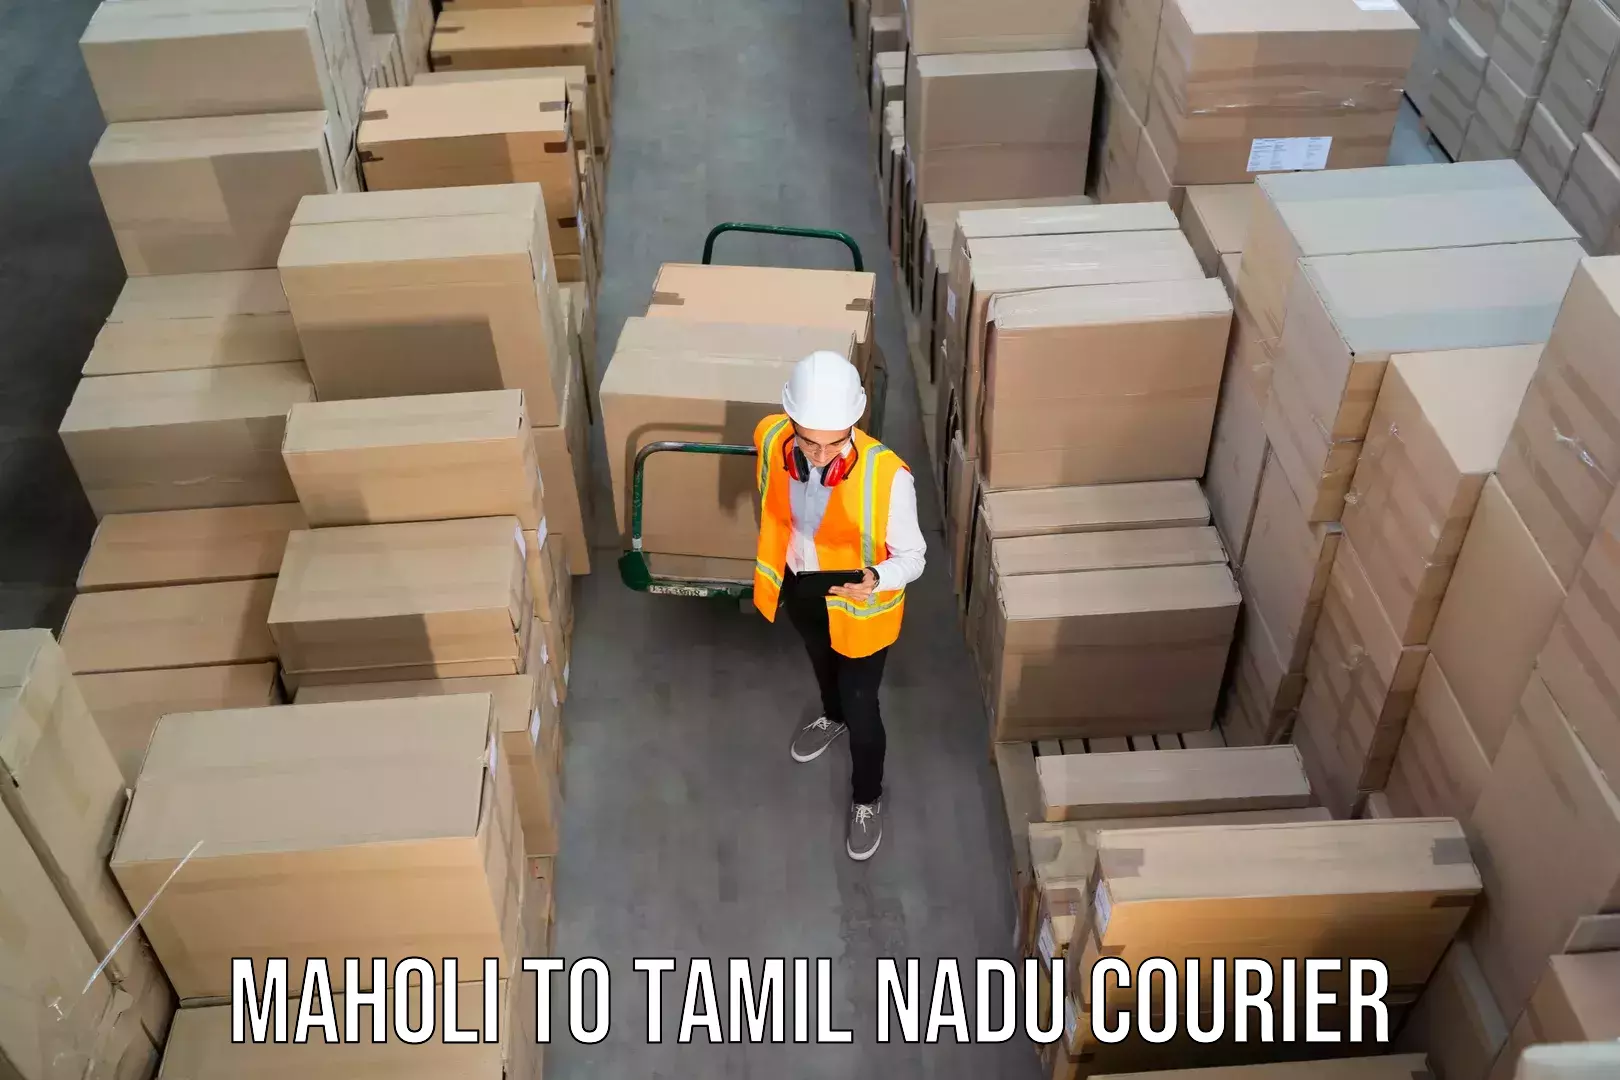 Professional courier services Maholi to Tamil Nadu